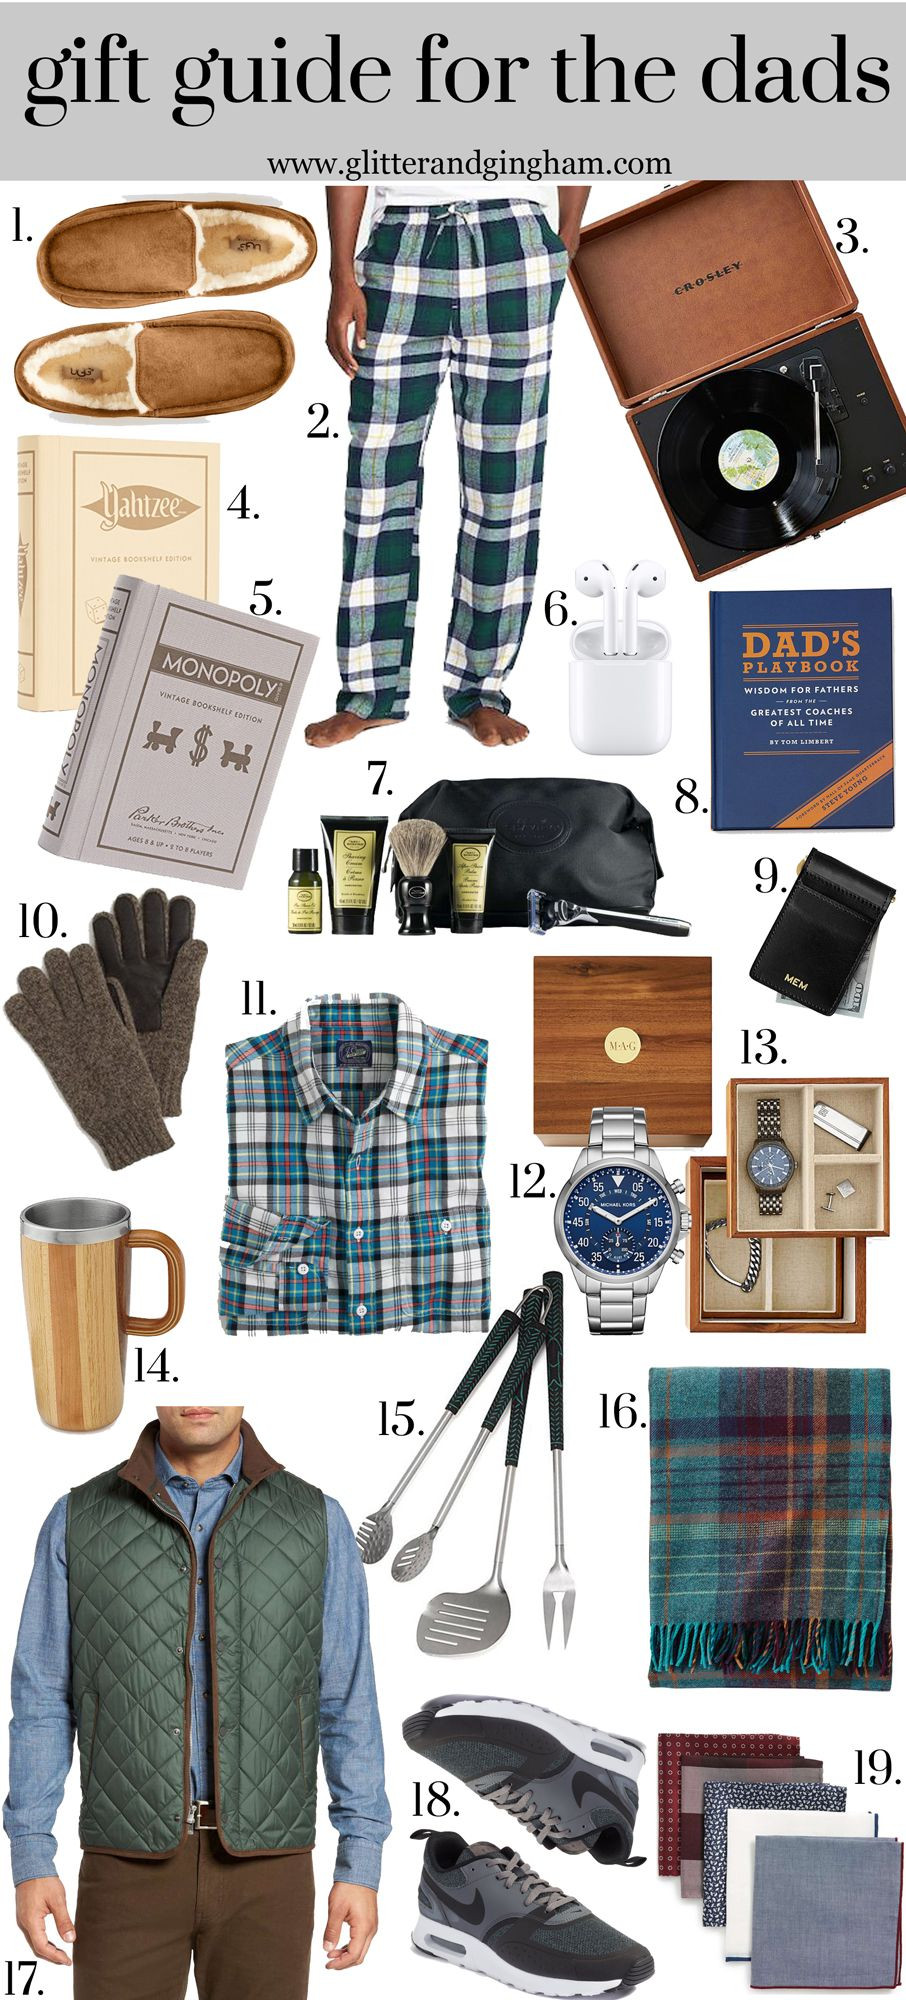 Birthday Gift Ideas For Father In Law
 The Ultimate Gift Guide for HIM